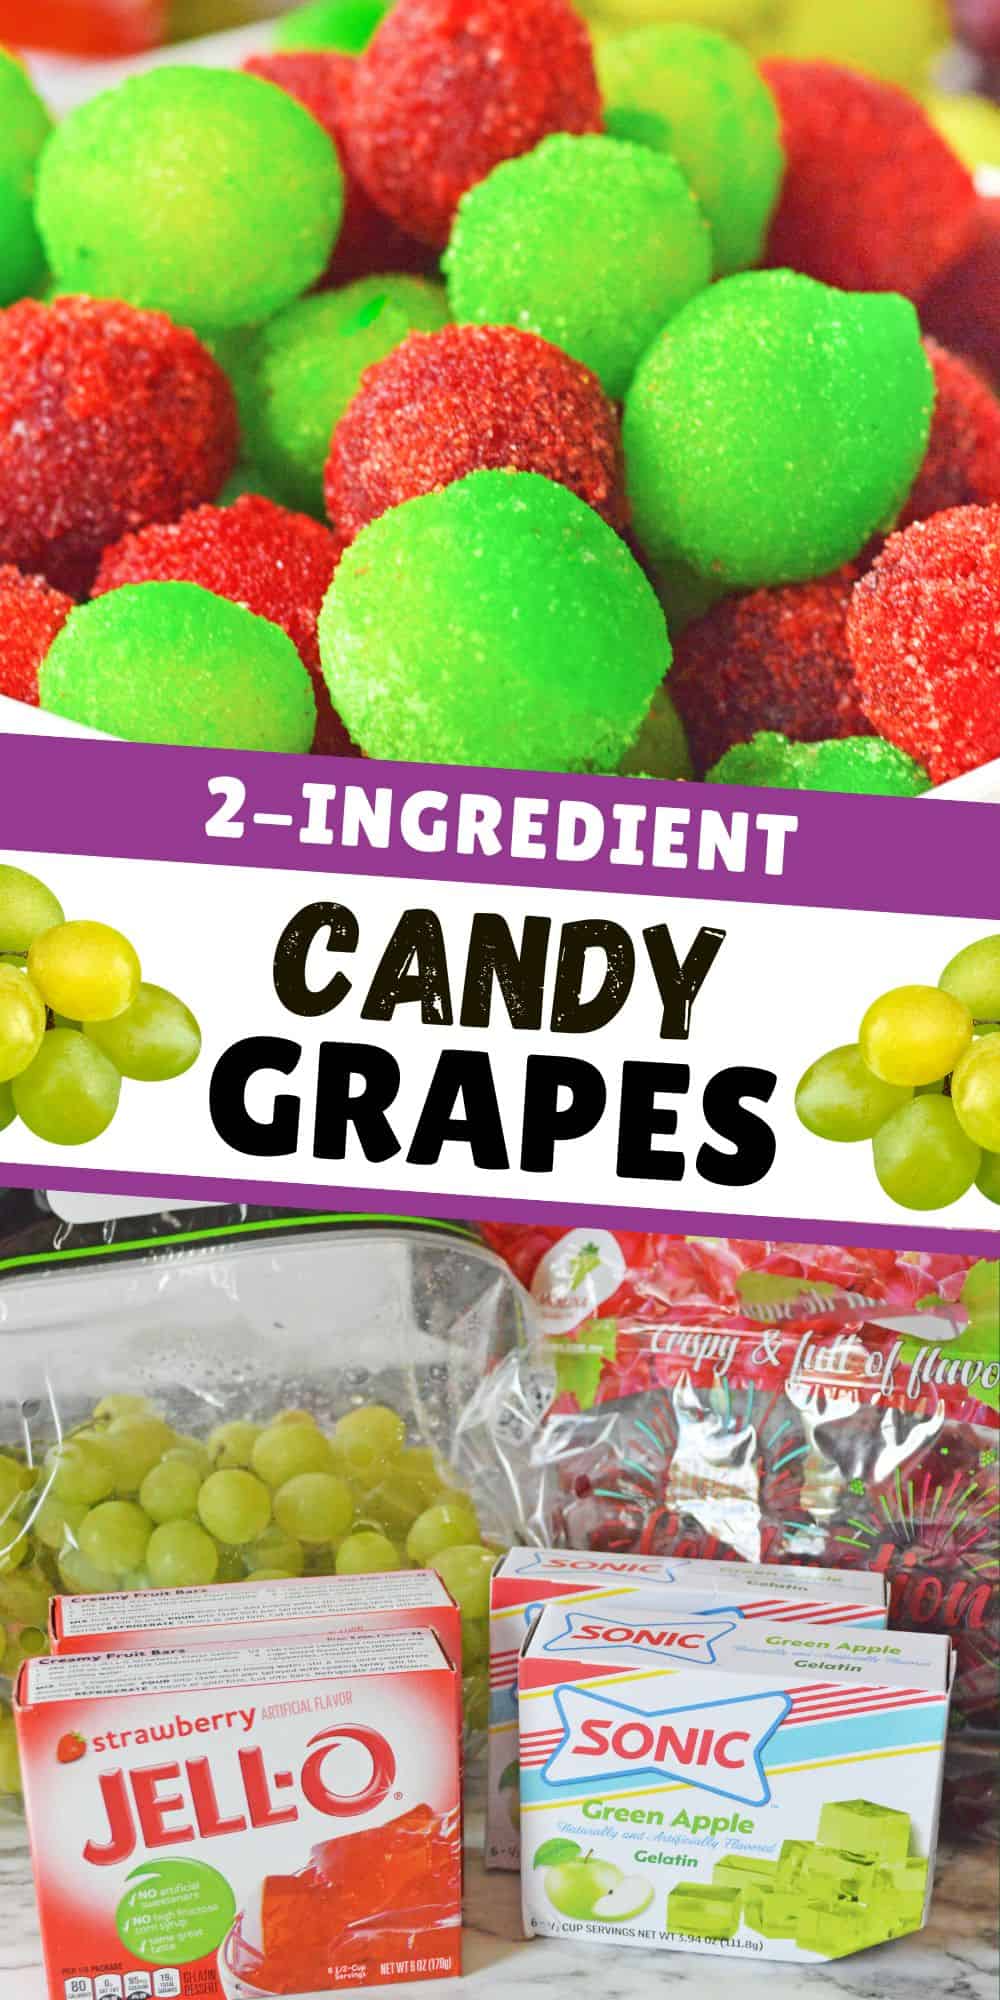 2-ingredient Candy Grapes.